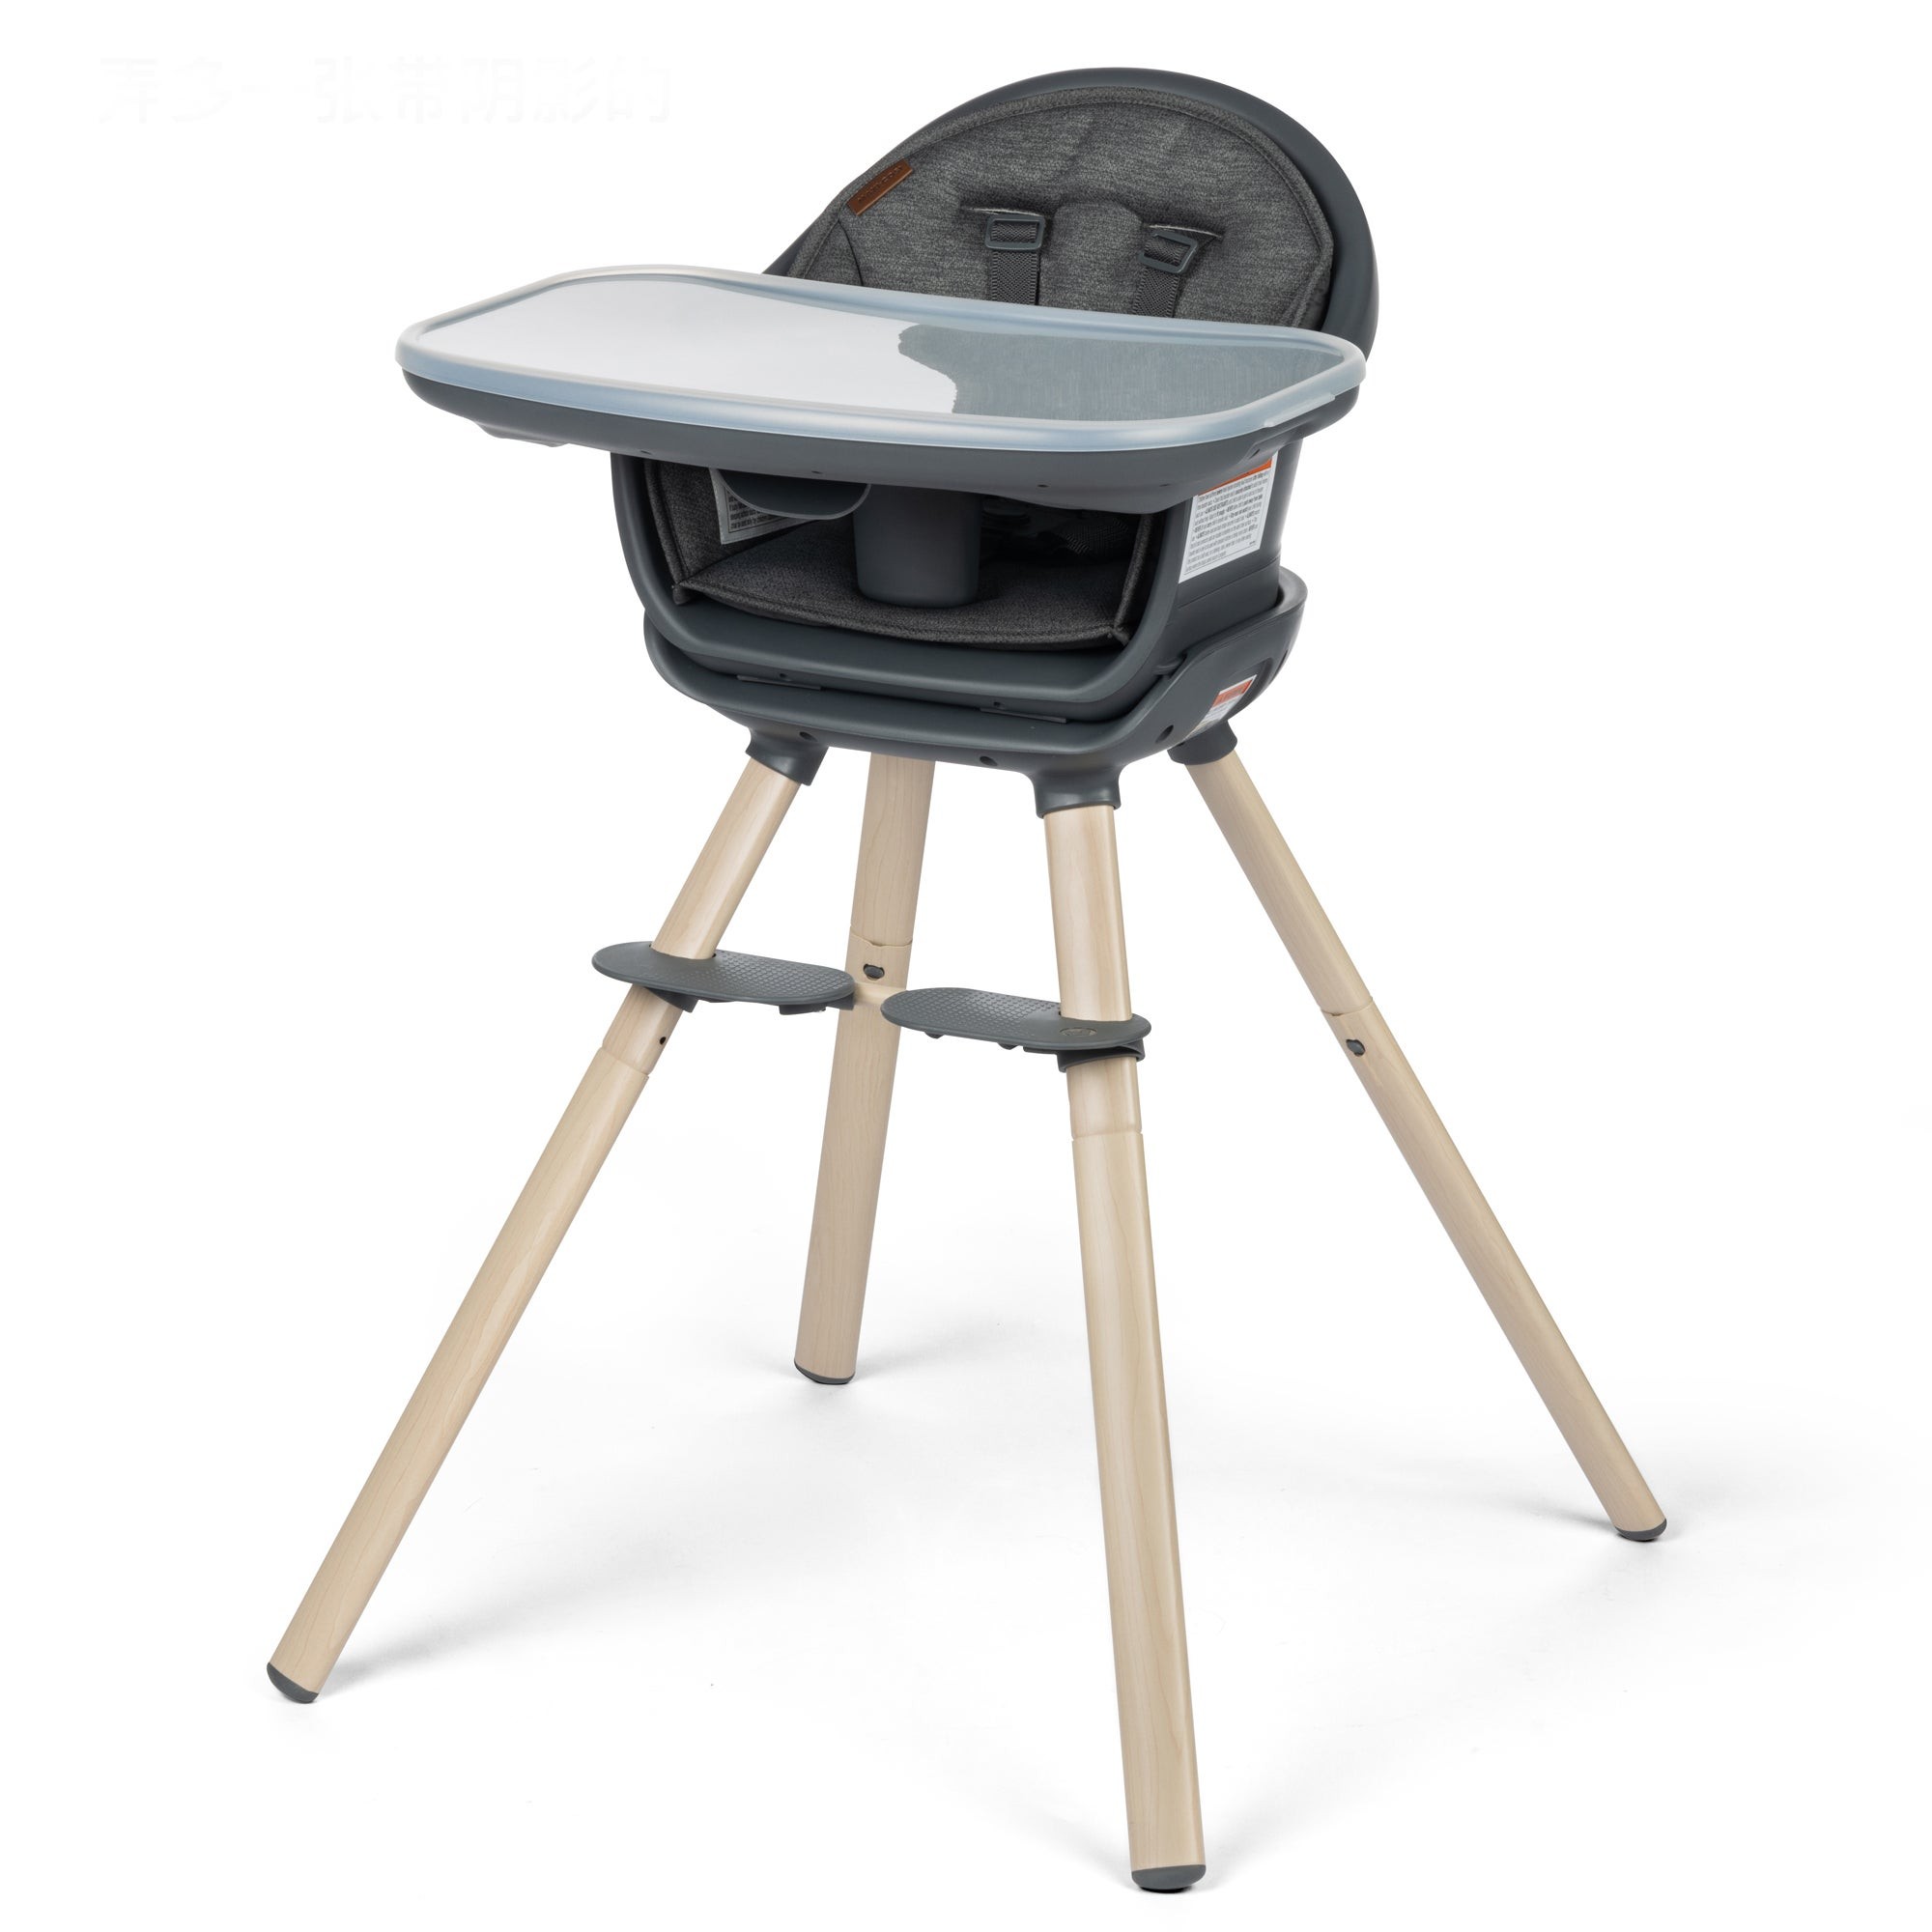 Moa 8-in-1 High Chair - EcoCare Classic Graphite